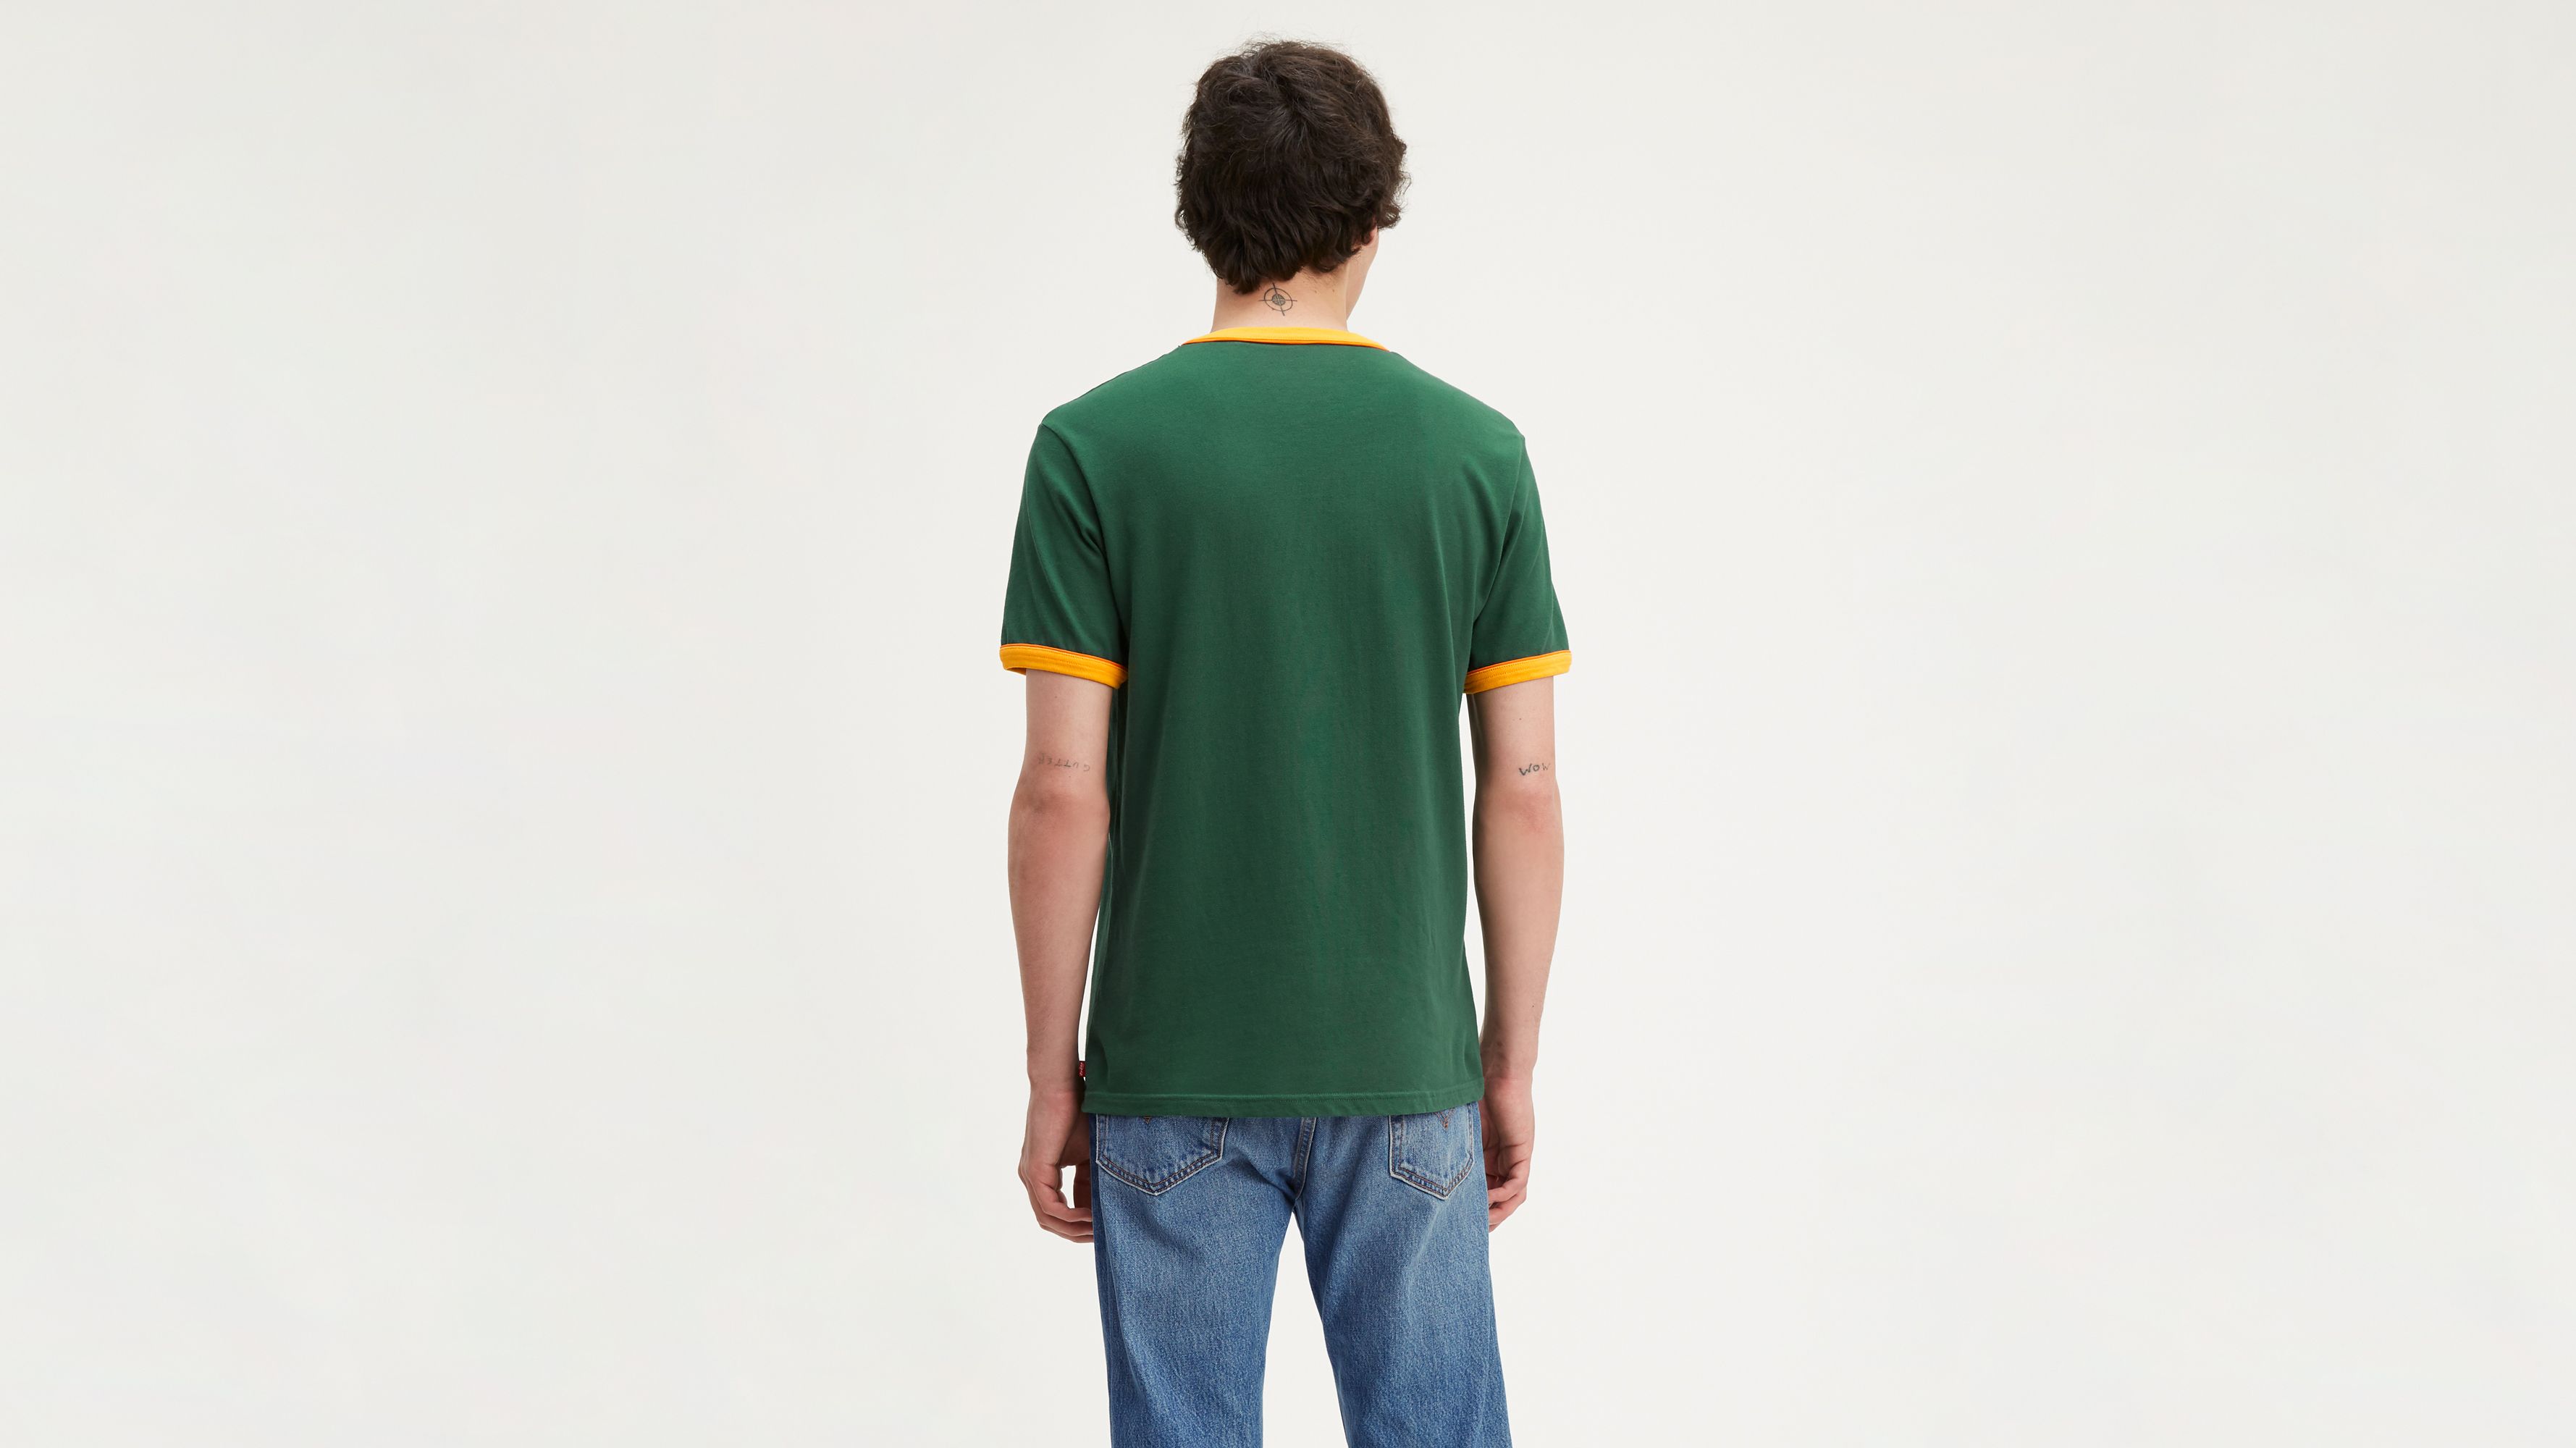 Levi's® x Stranger Things Camp Know Where Ringer Tee Shirt